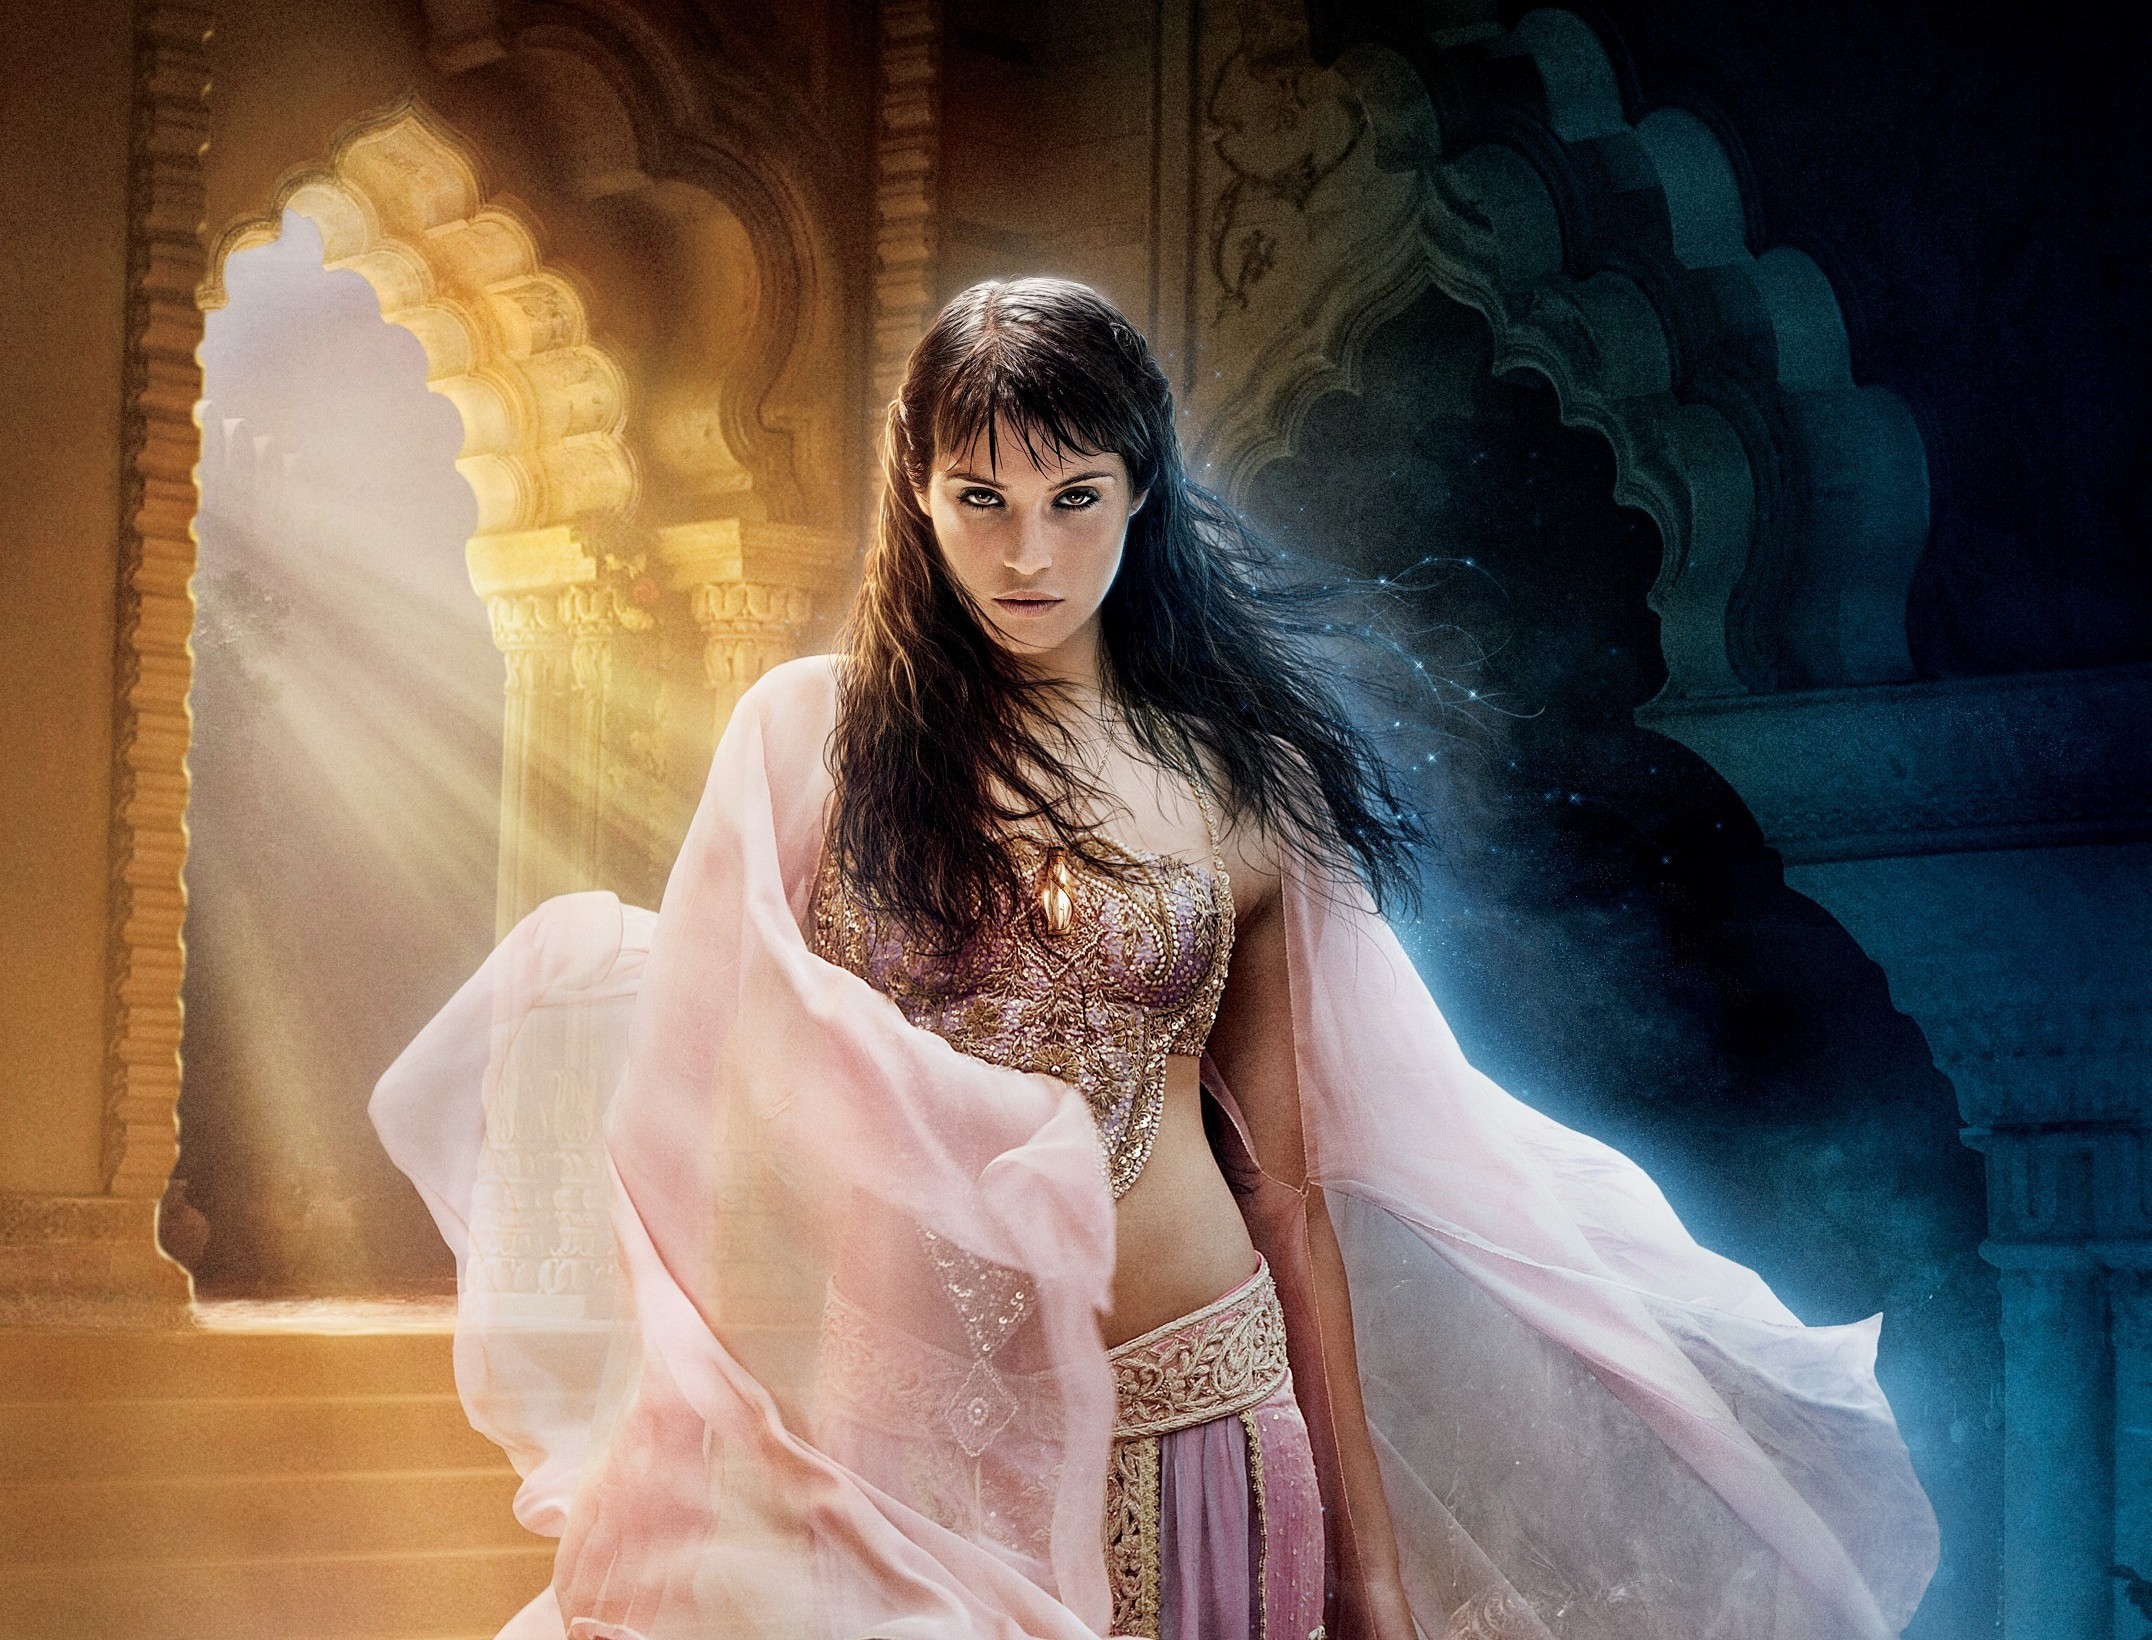 gemma arterton, prince of persia, movie, prince of persia: the sands of time HD wallpaper